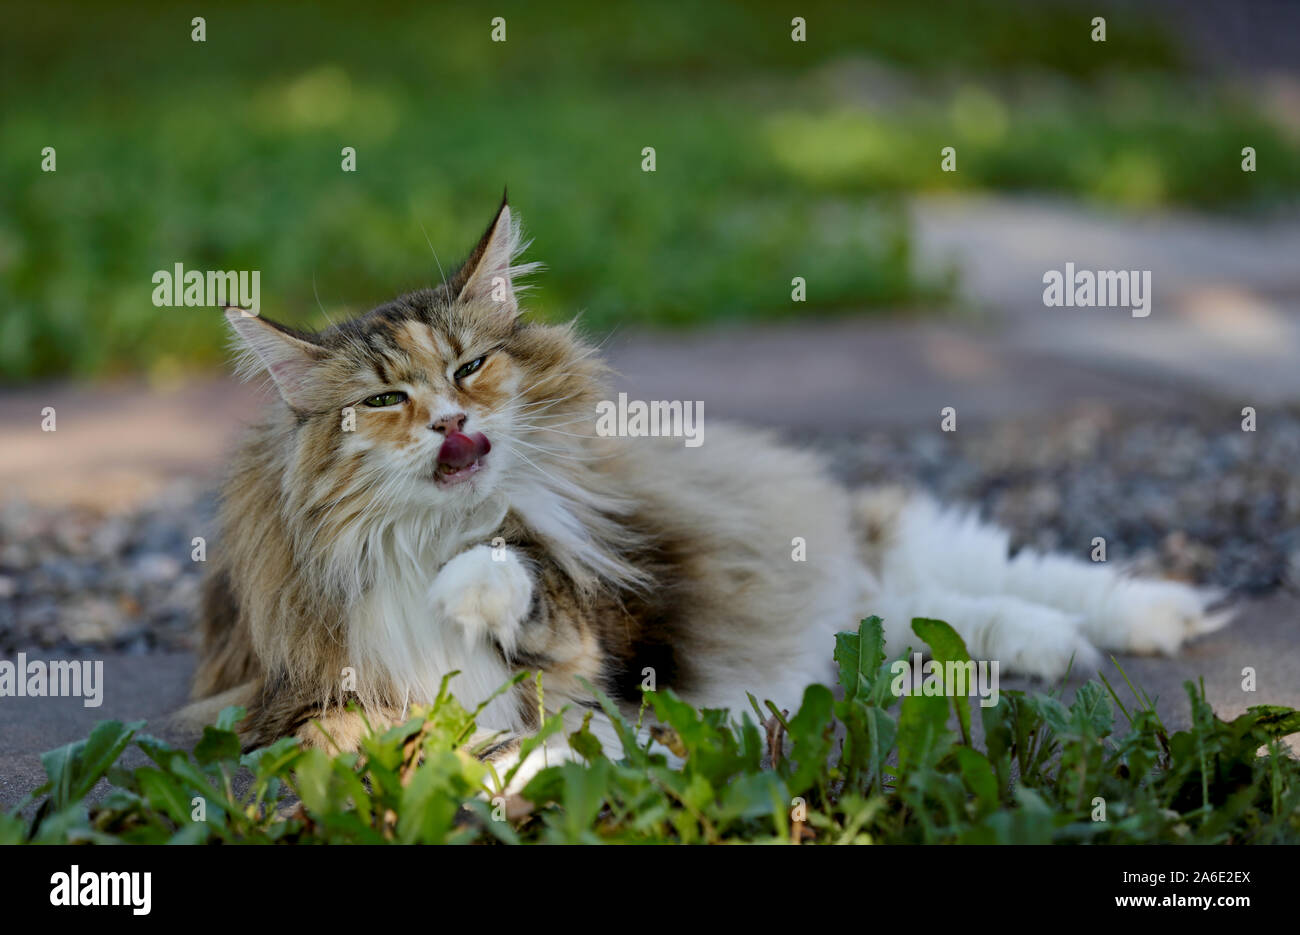 A sweet tortoiseshell norwegian forest cat female licking her paw. She is resting in grass Stock Photo